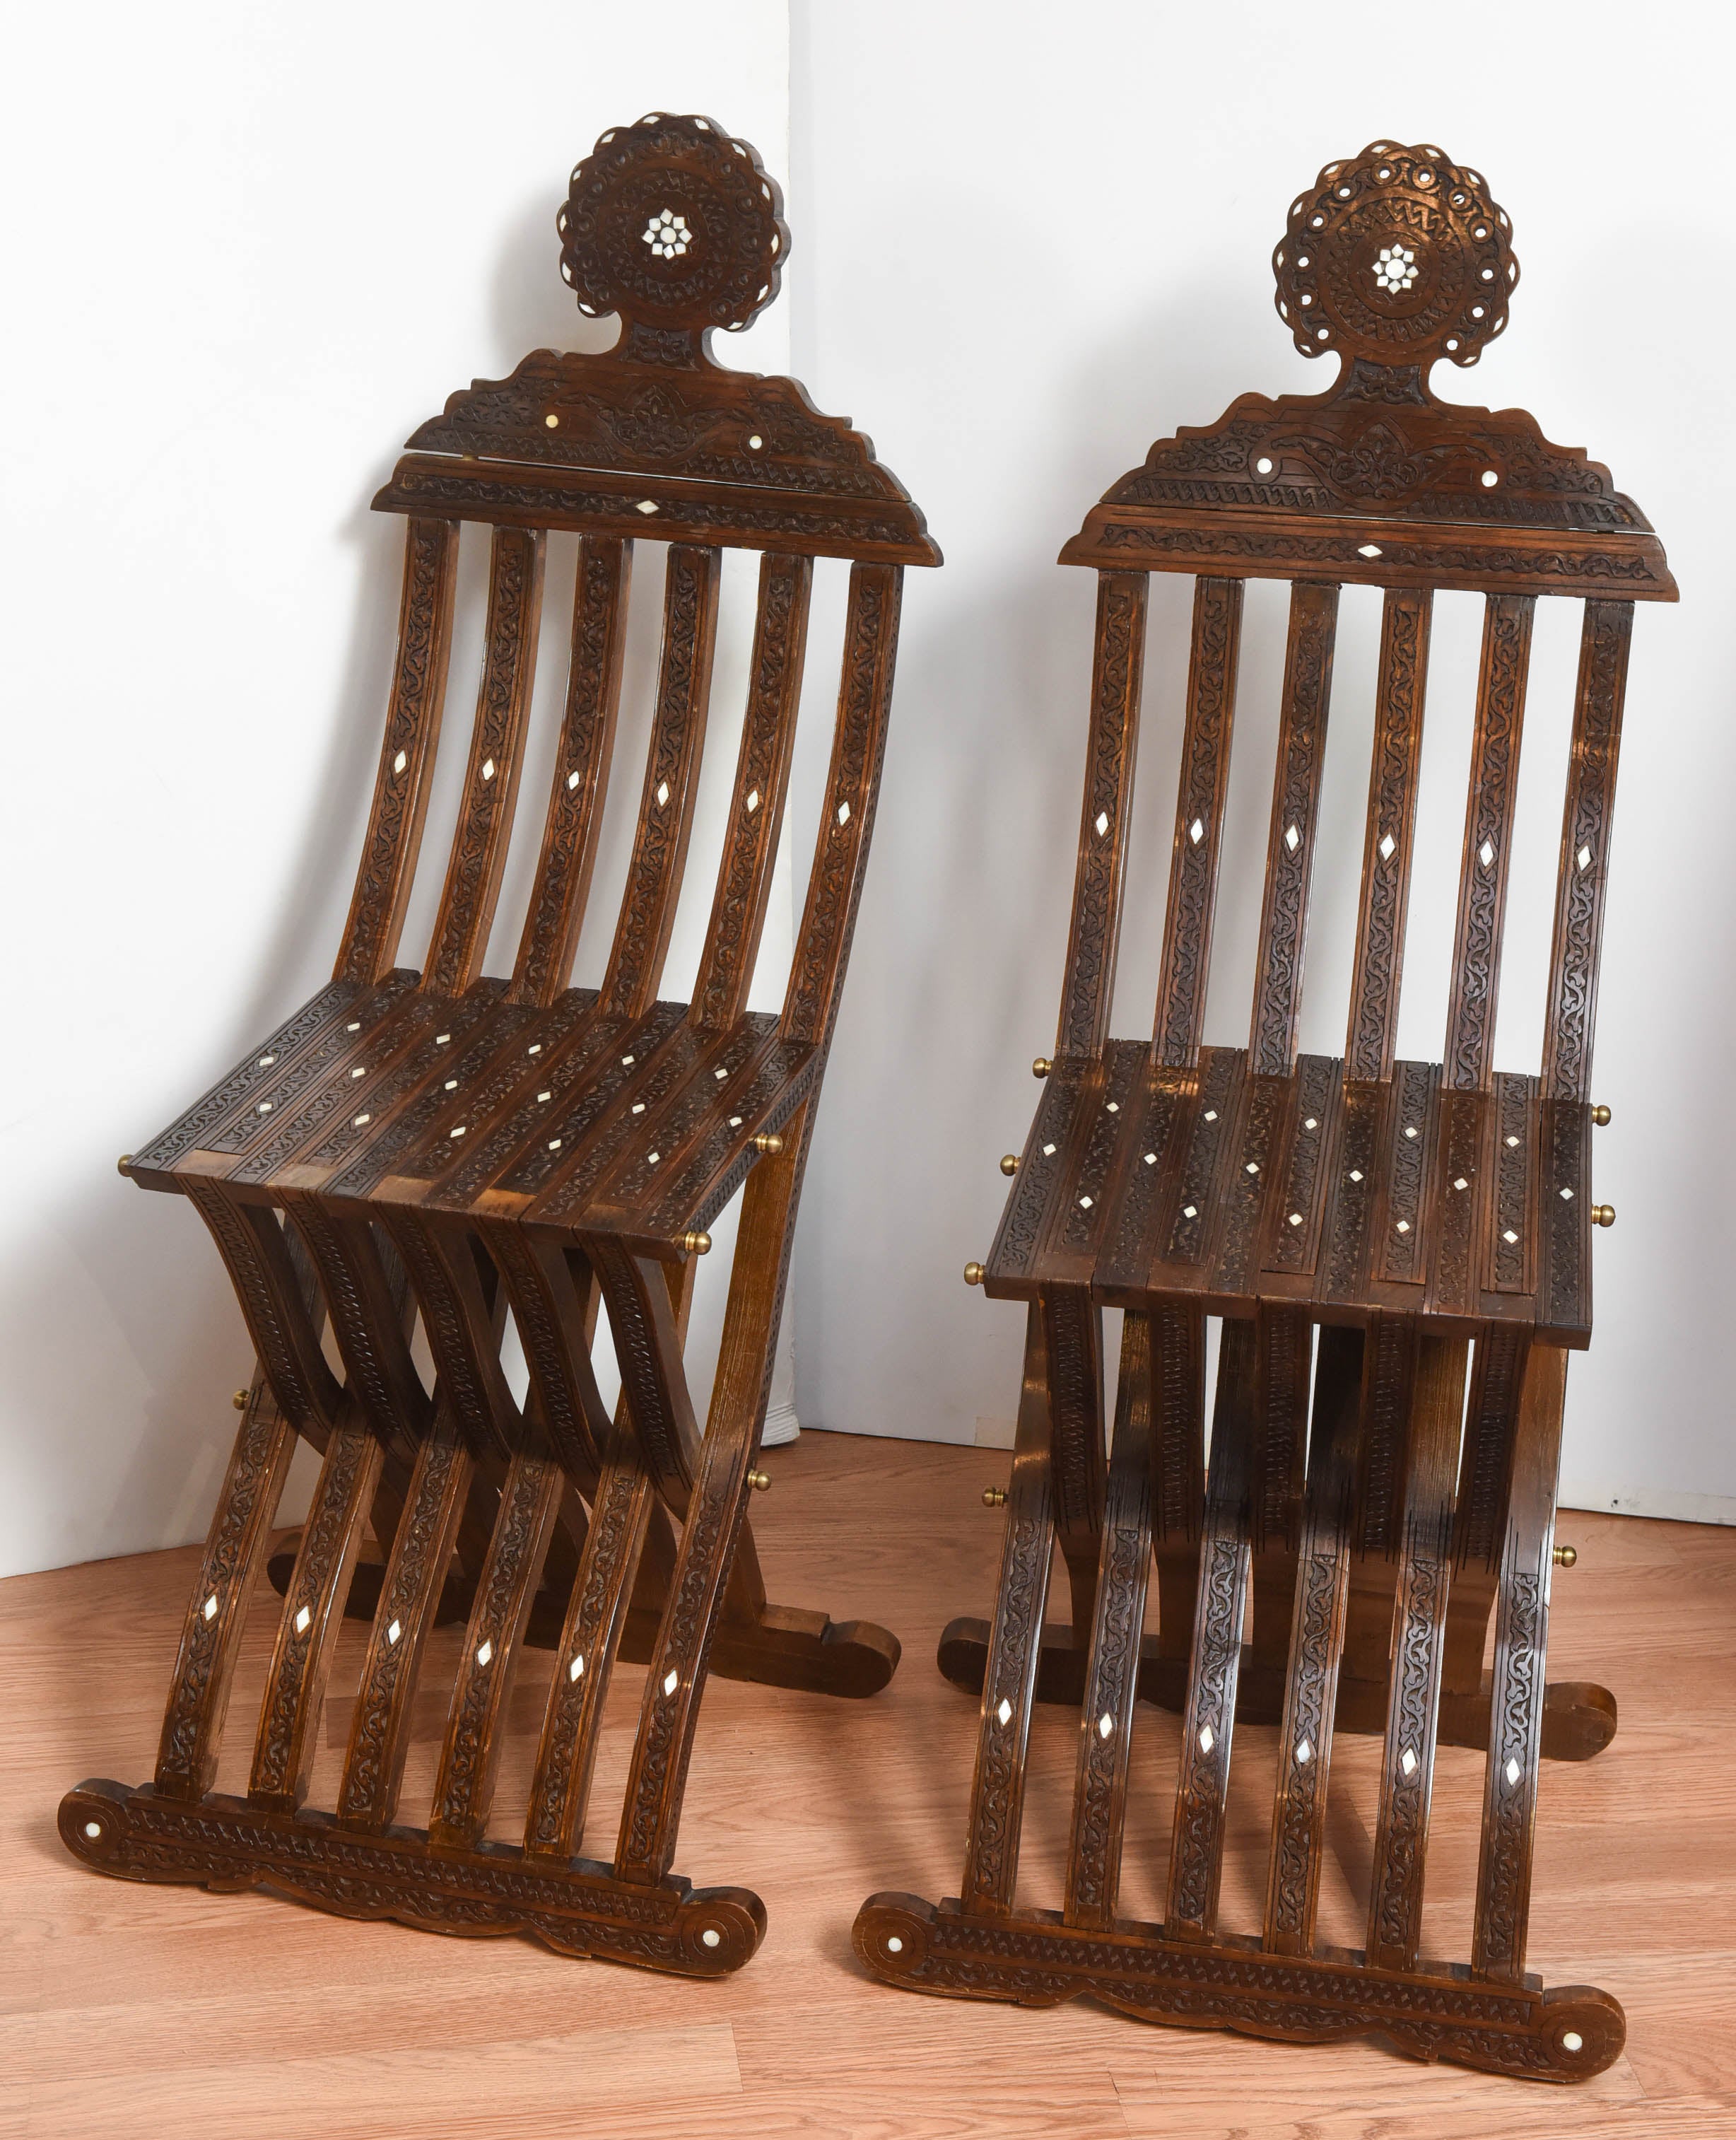 Beautiful pair of folding Syrian scribe chairs with intricate mother-of-pearl inlays.